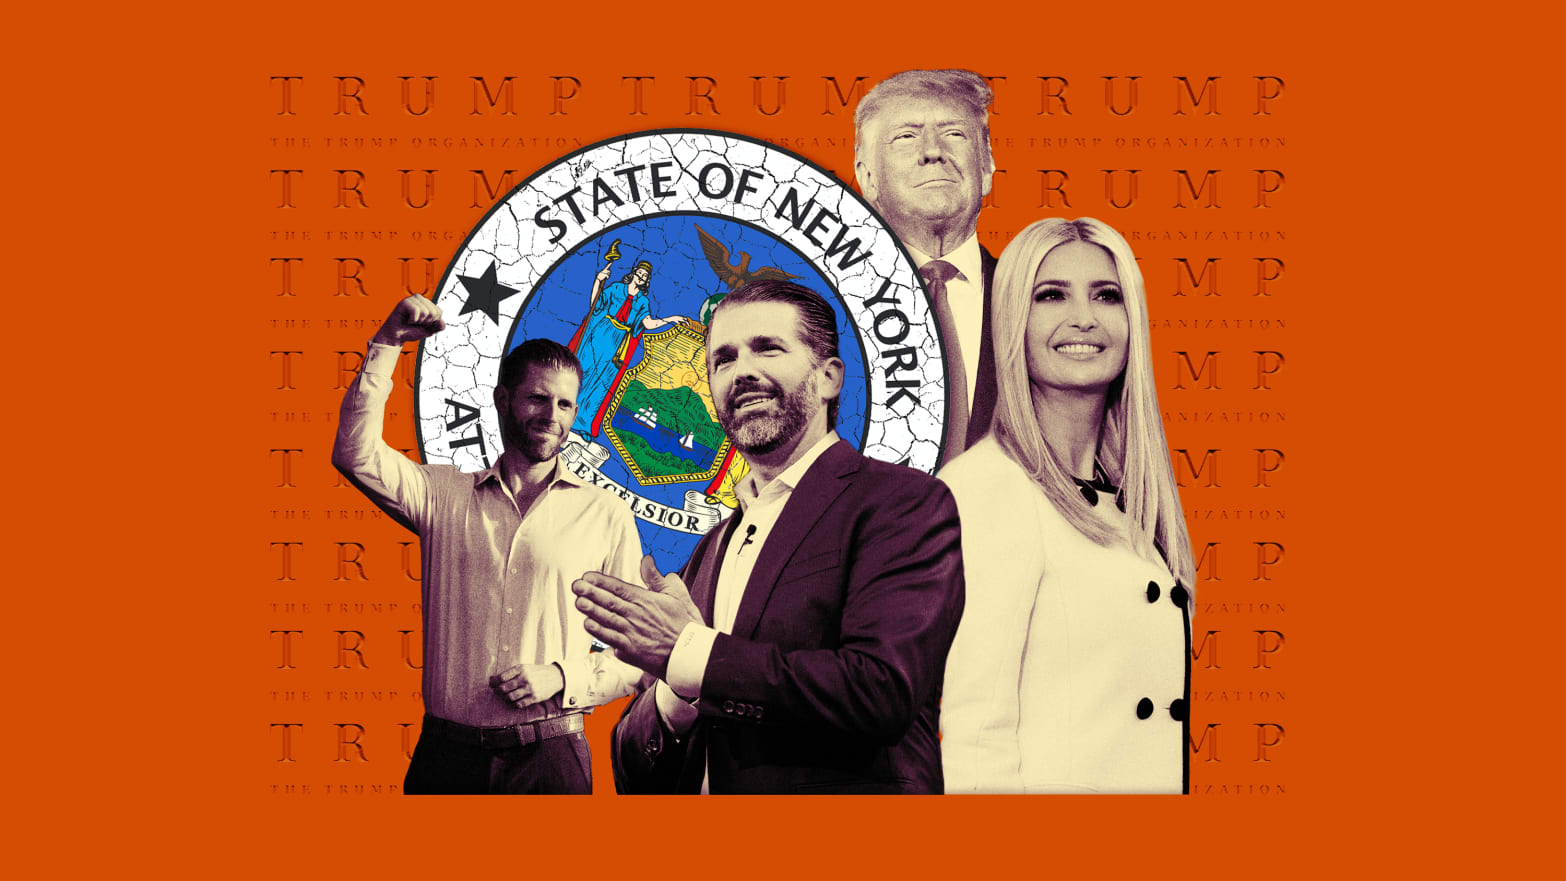 A photo illustration of Eric Trump, Donald Trump Jr., Ivanka Trump, Donald Trump, the seal of the New York Attorney General, and logos of the Trump Organization.